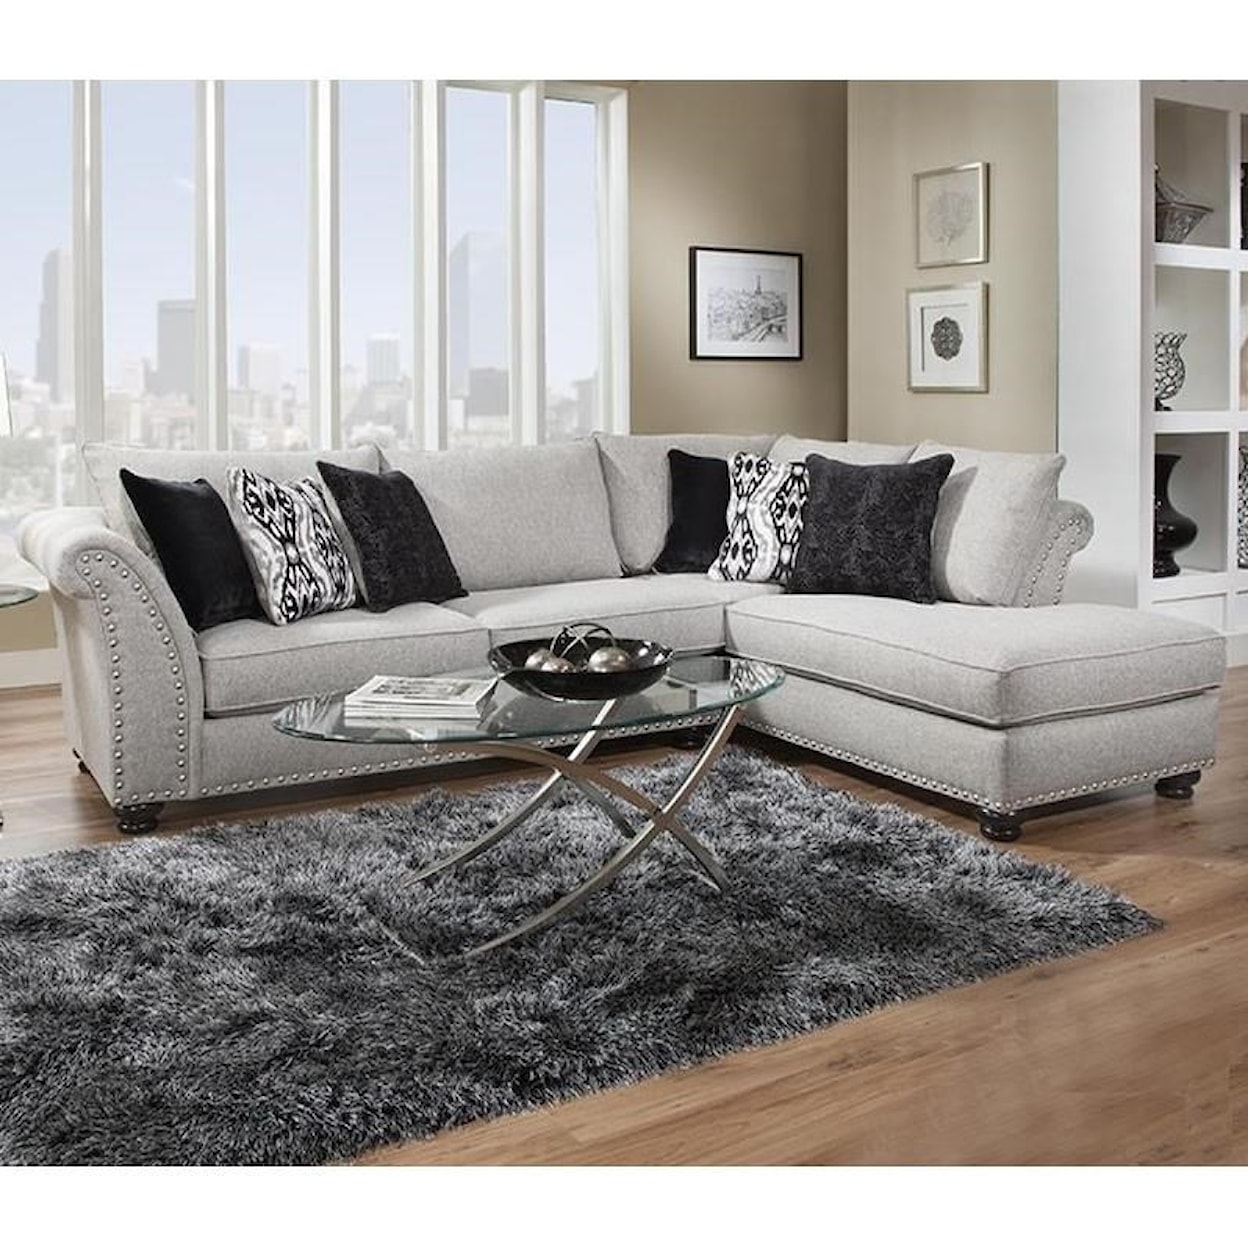 Albany 396 Sectional with Chaise